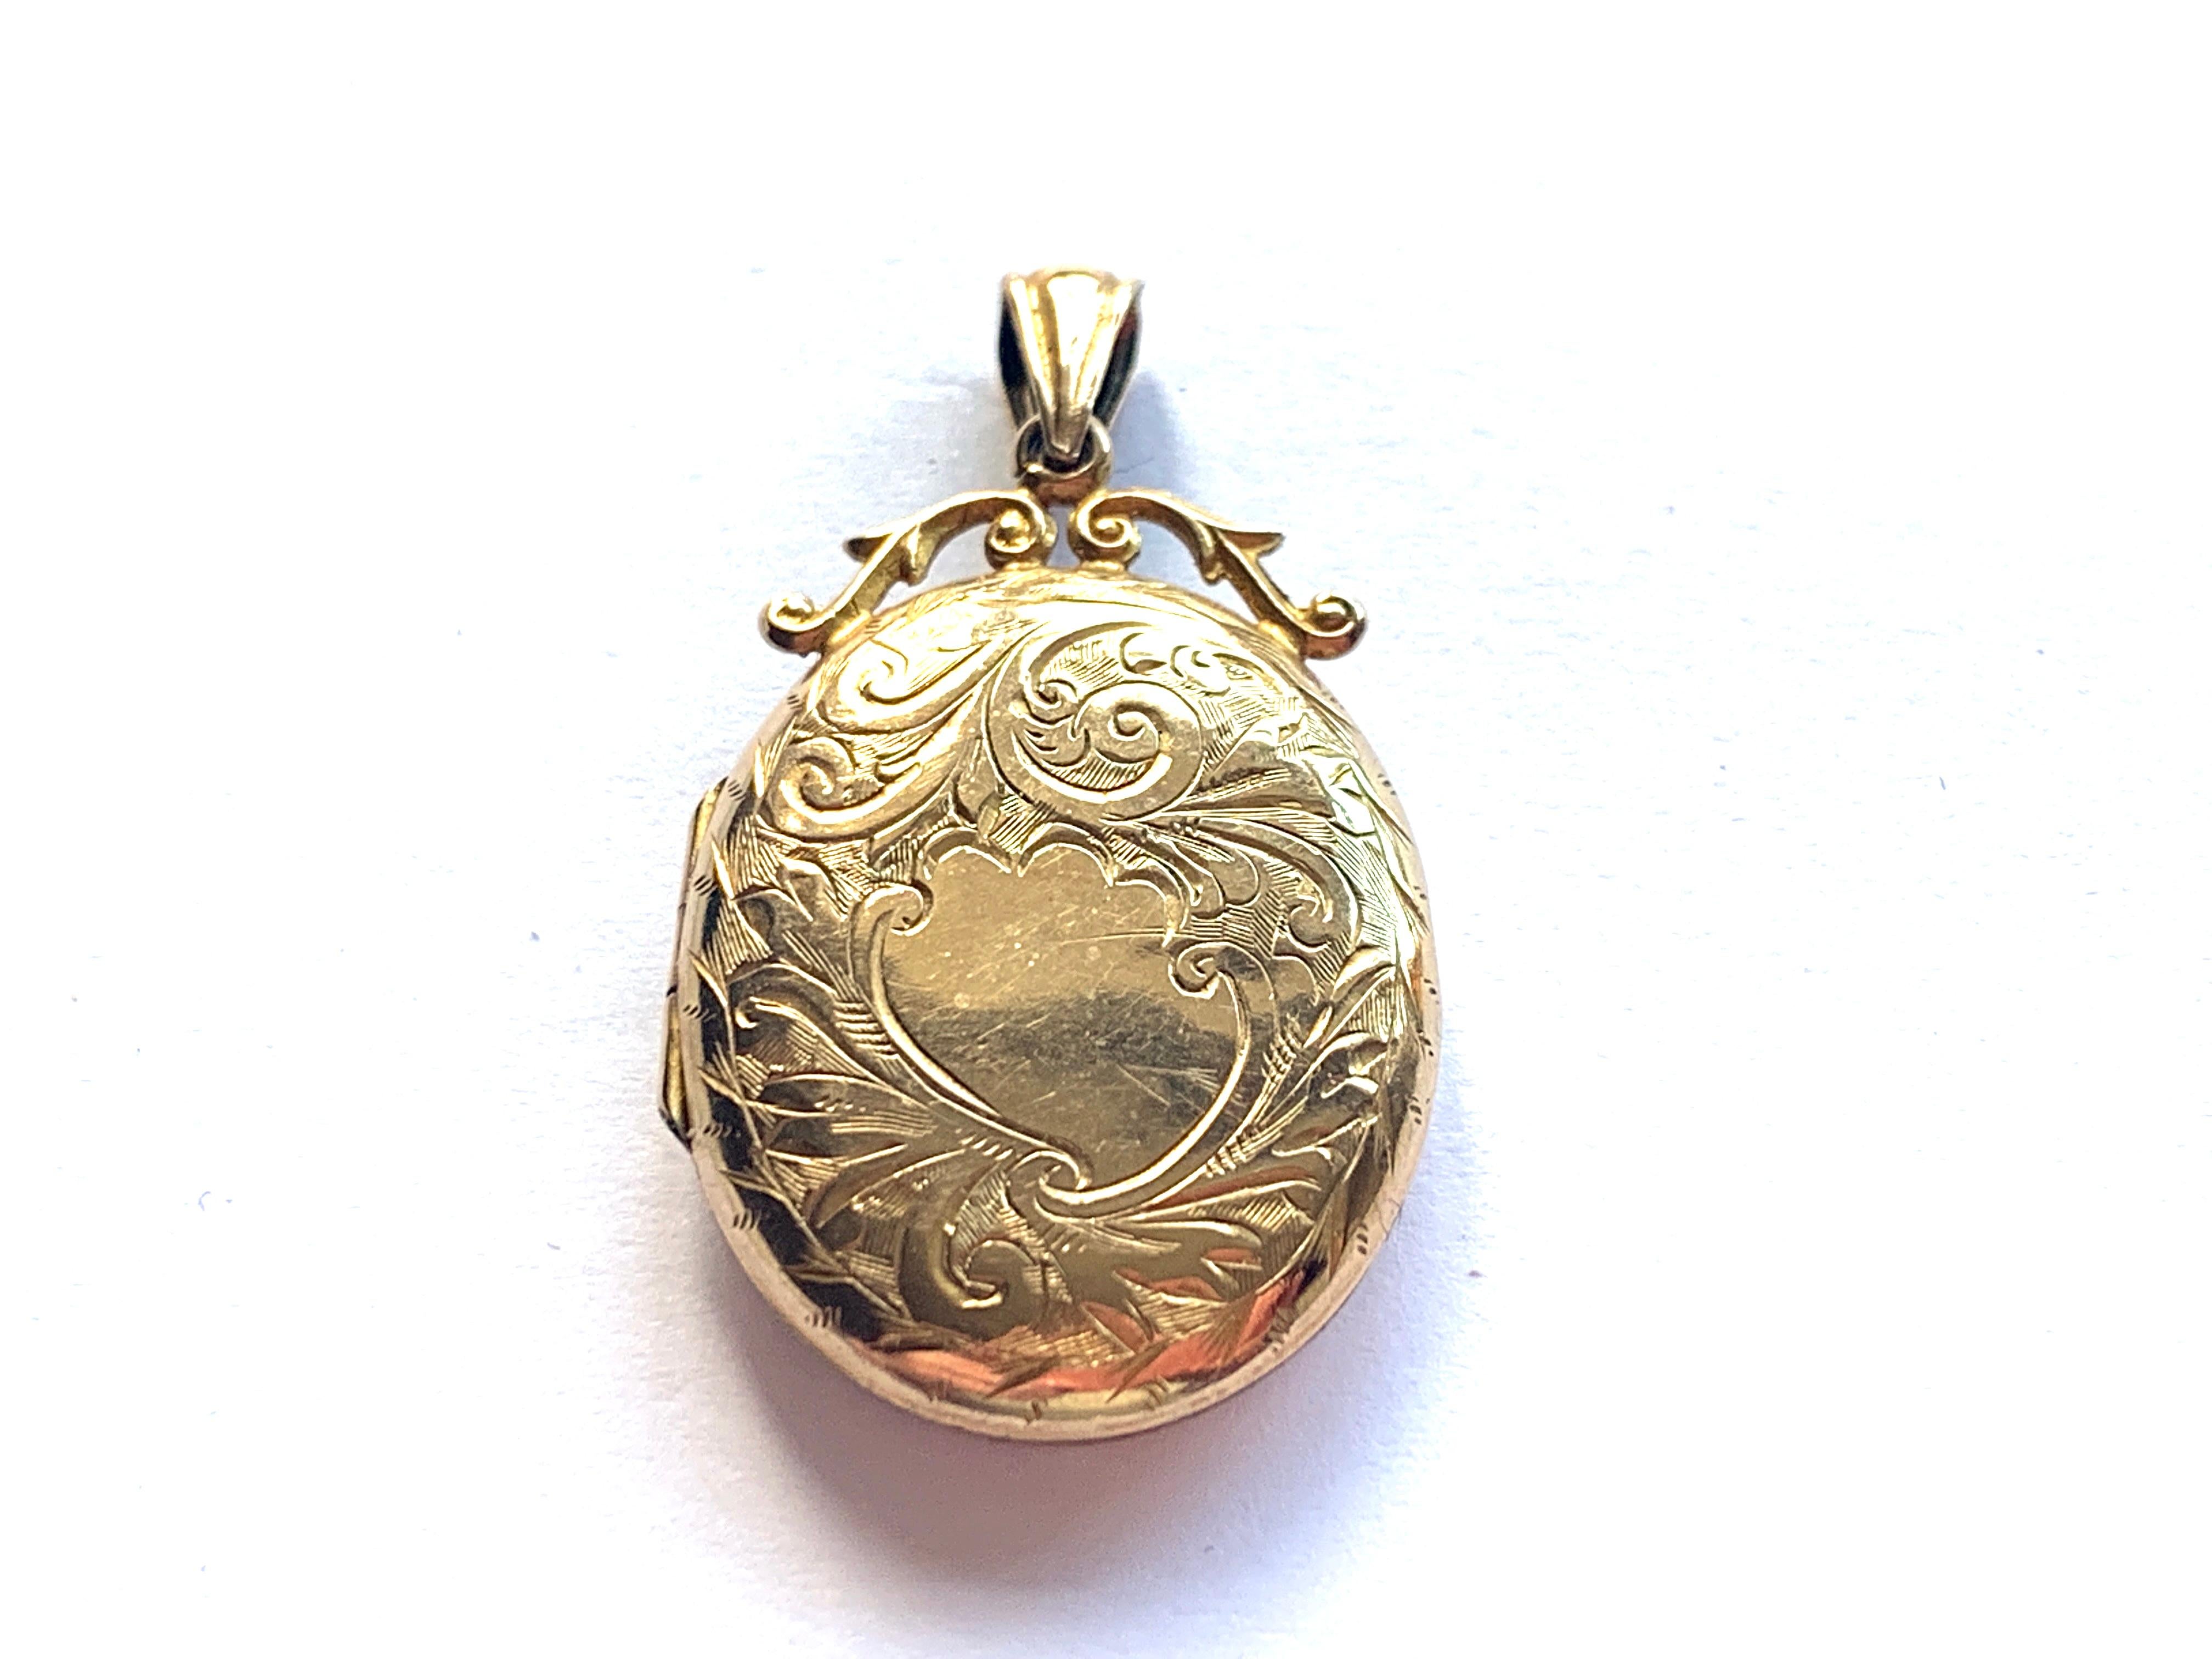 Antique Victorian 9ct Gold Locket
beautiful floral engraving
stamped 9 375 on bail & inside
but also fully hallmarked on reverse
Makers initials WHC , Birmingham 1857
Size 2cm x 2.5 cm ( not including bail )
Weight 2.85 grammes